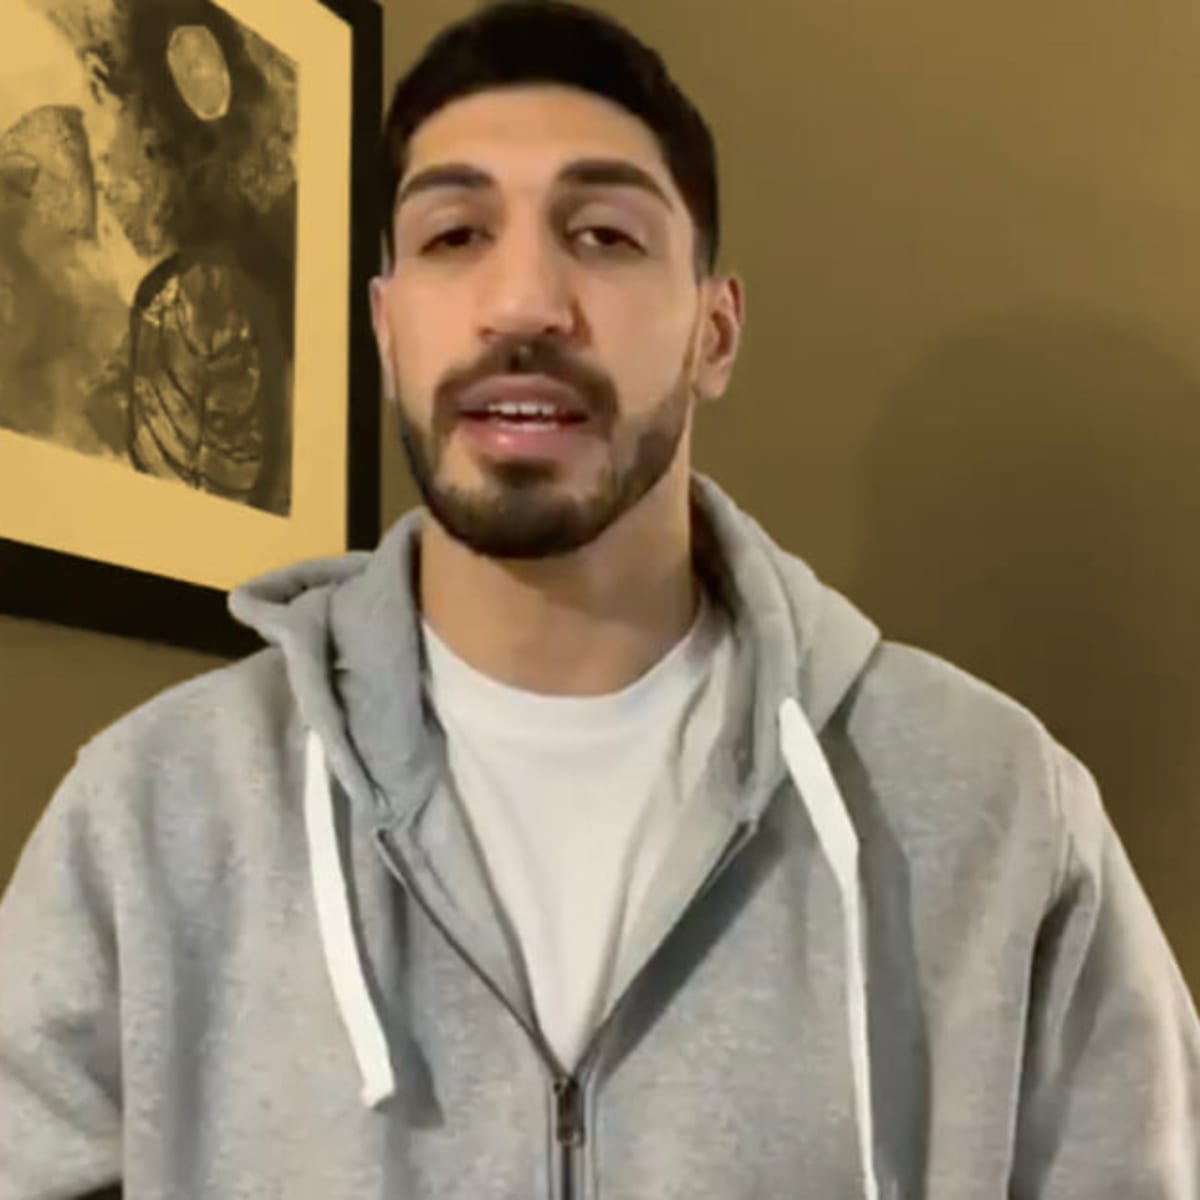 Enes Kanter calls out Nike for 'silence' over human rights abuses in China